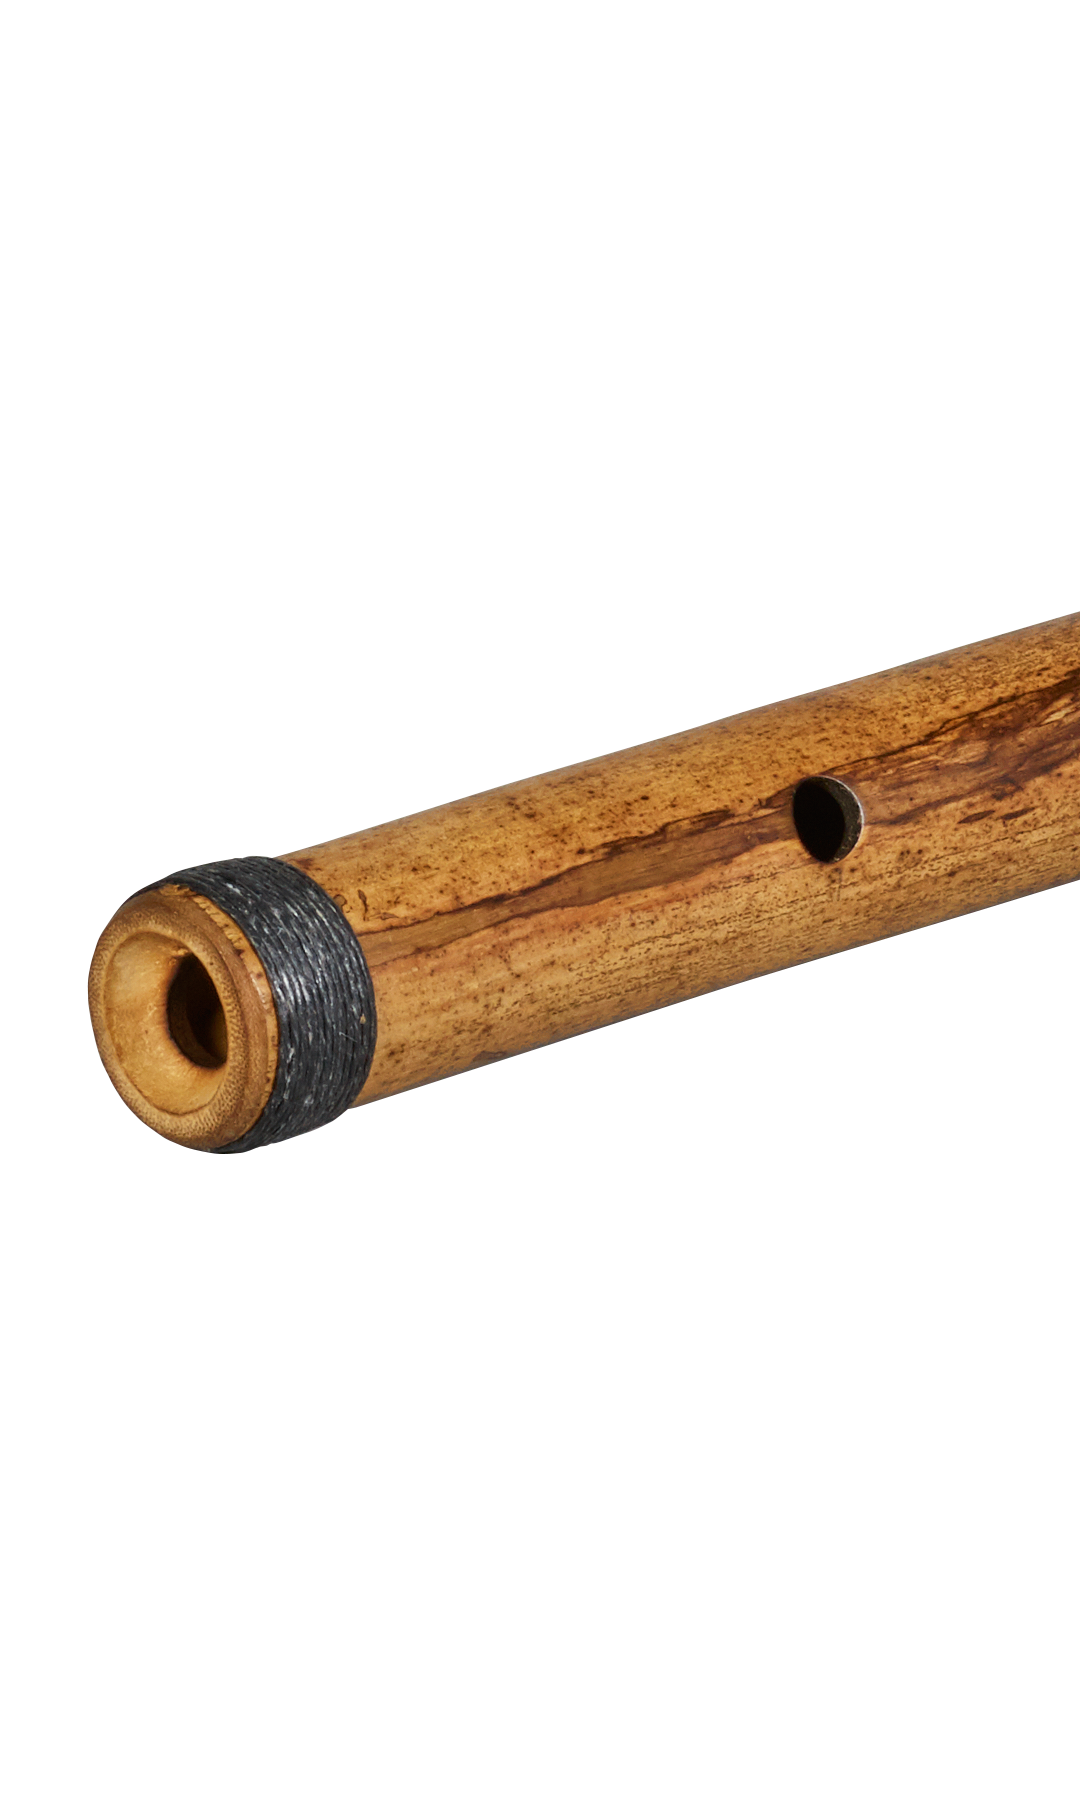 END BLOWN FLUTE Oriental Japanese Bamboo Body